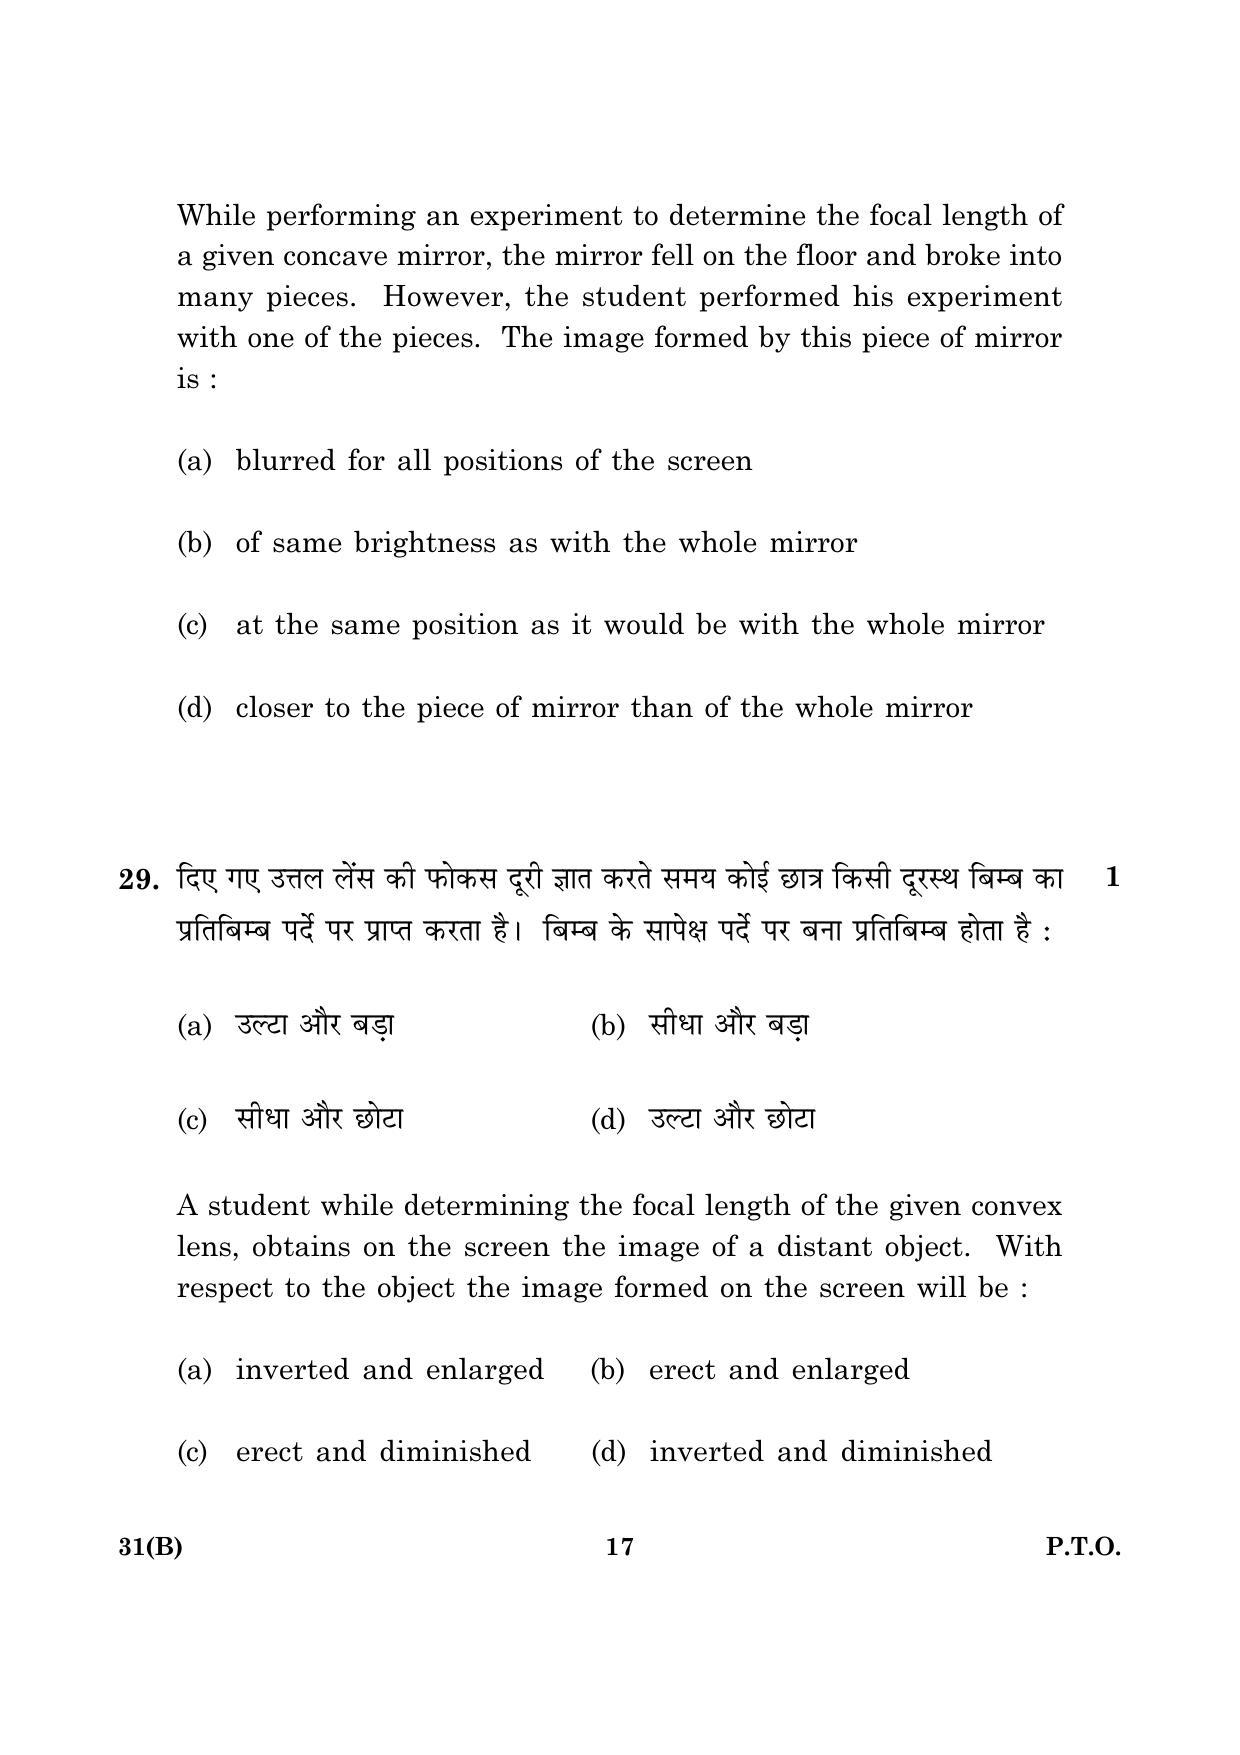 CBSE Class 10 031(B) Science 2016 Question Paper - Page 17